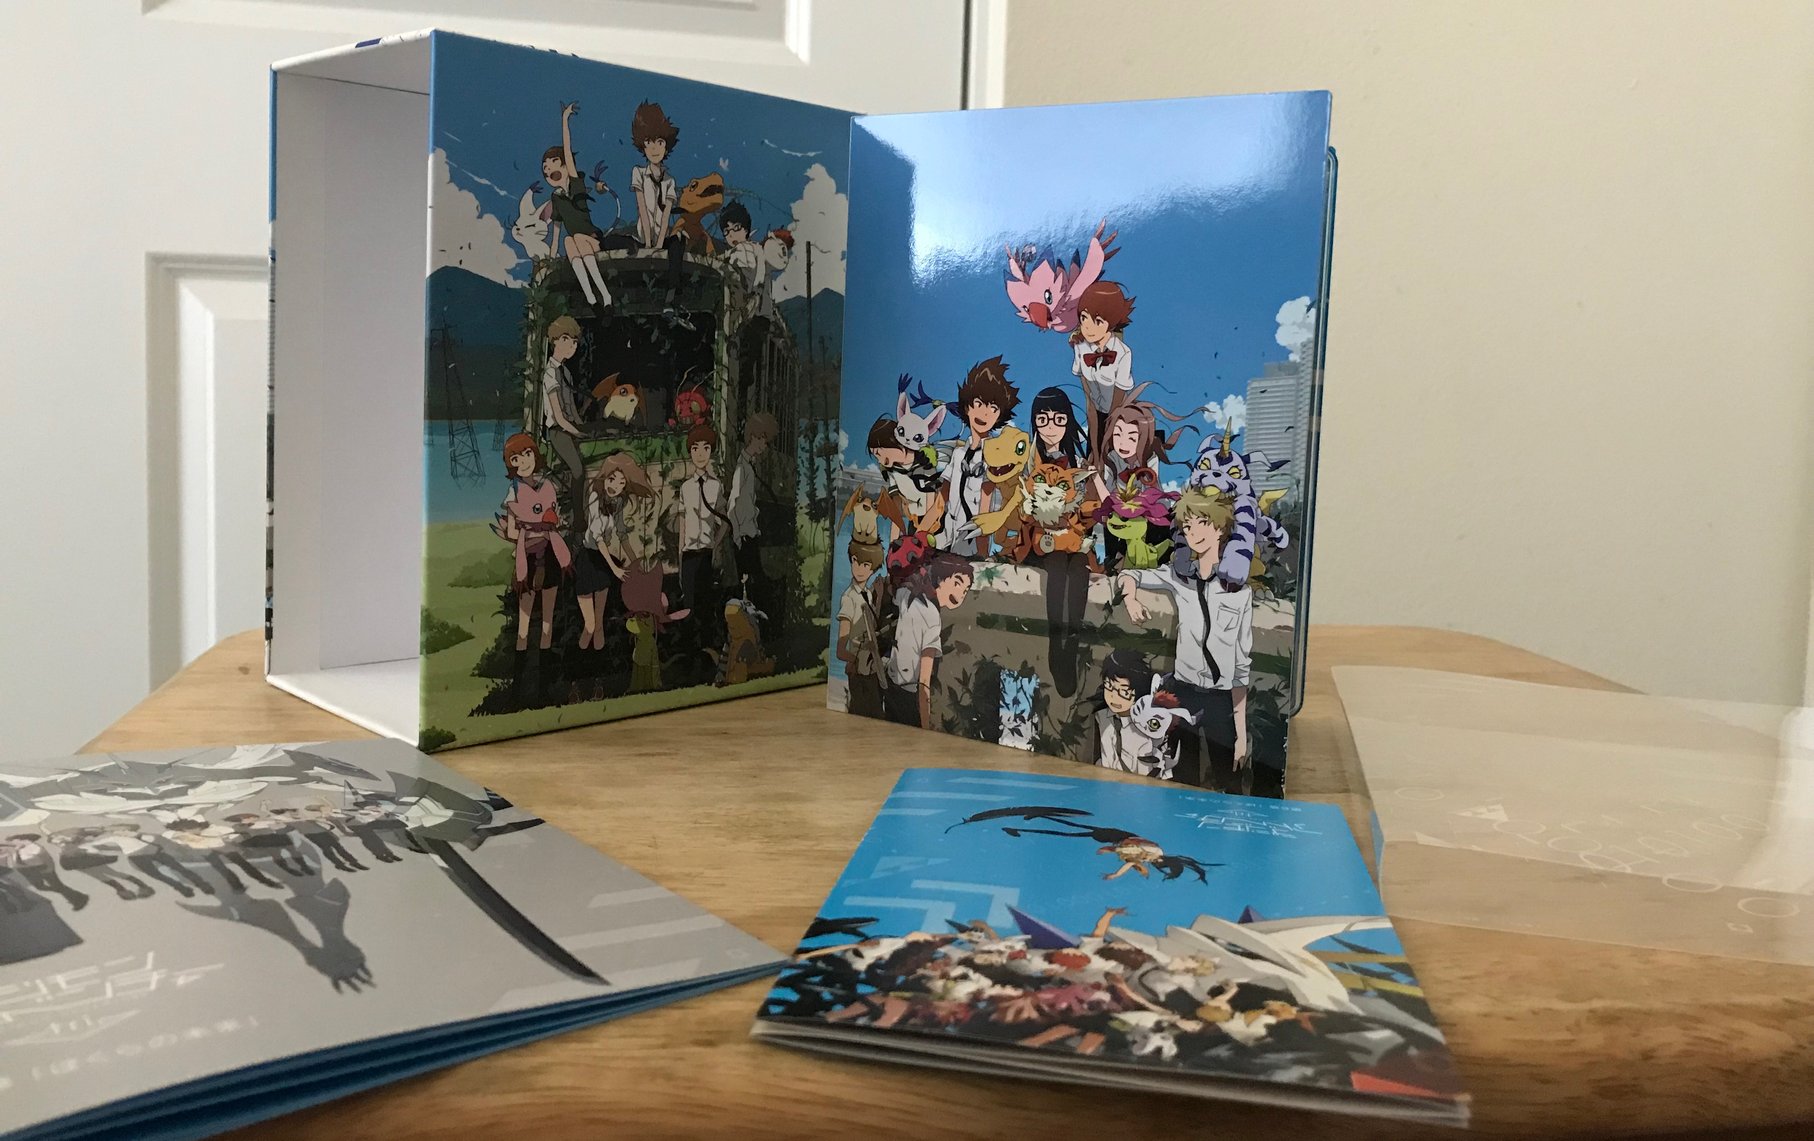 Digimon Adventure tri – Chapter 2 gets release date, Chapter 1 heading for  DVD/Blu-ray